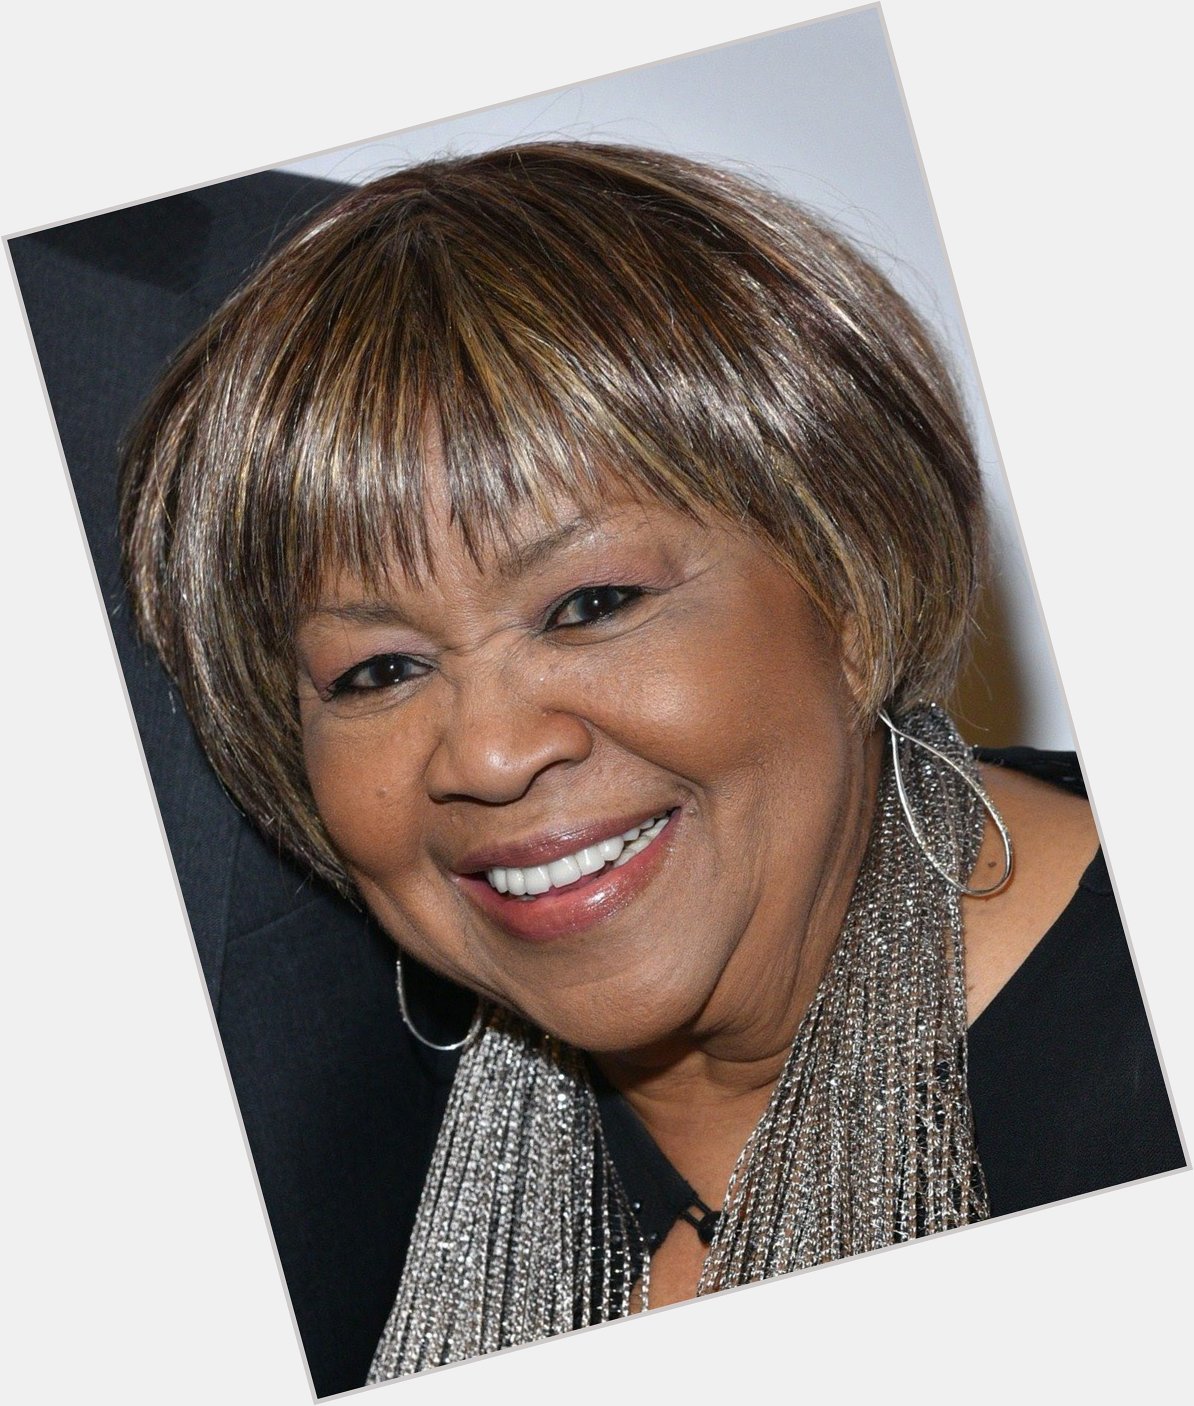 Happy 82nd birthday to 
MAVIS STAPLES, the great R&B + gospel singer known for her work with The Staples Singers 